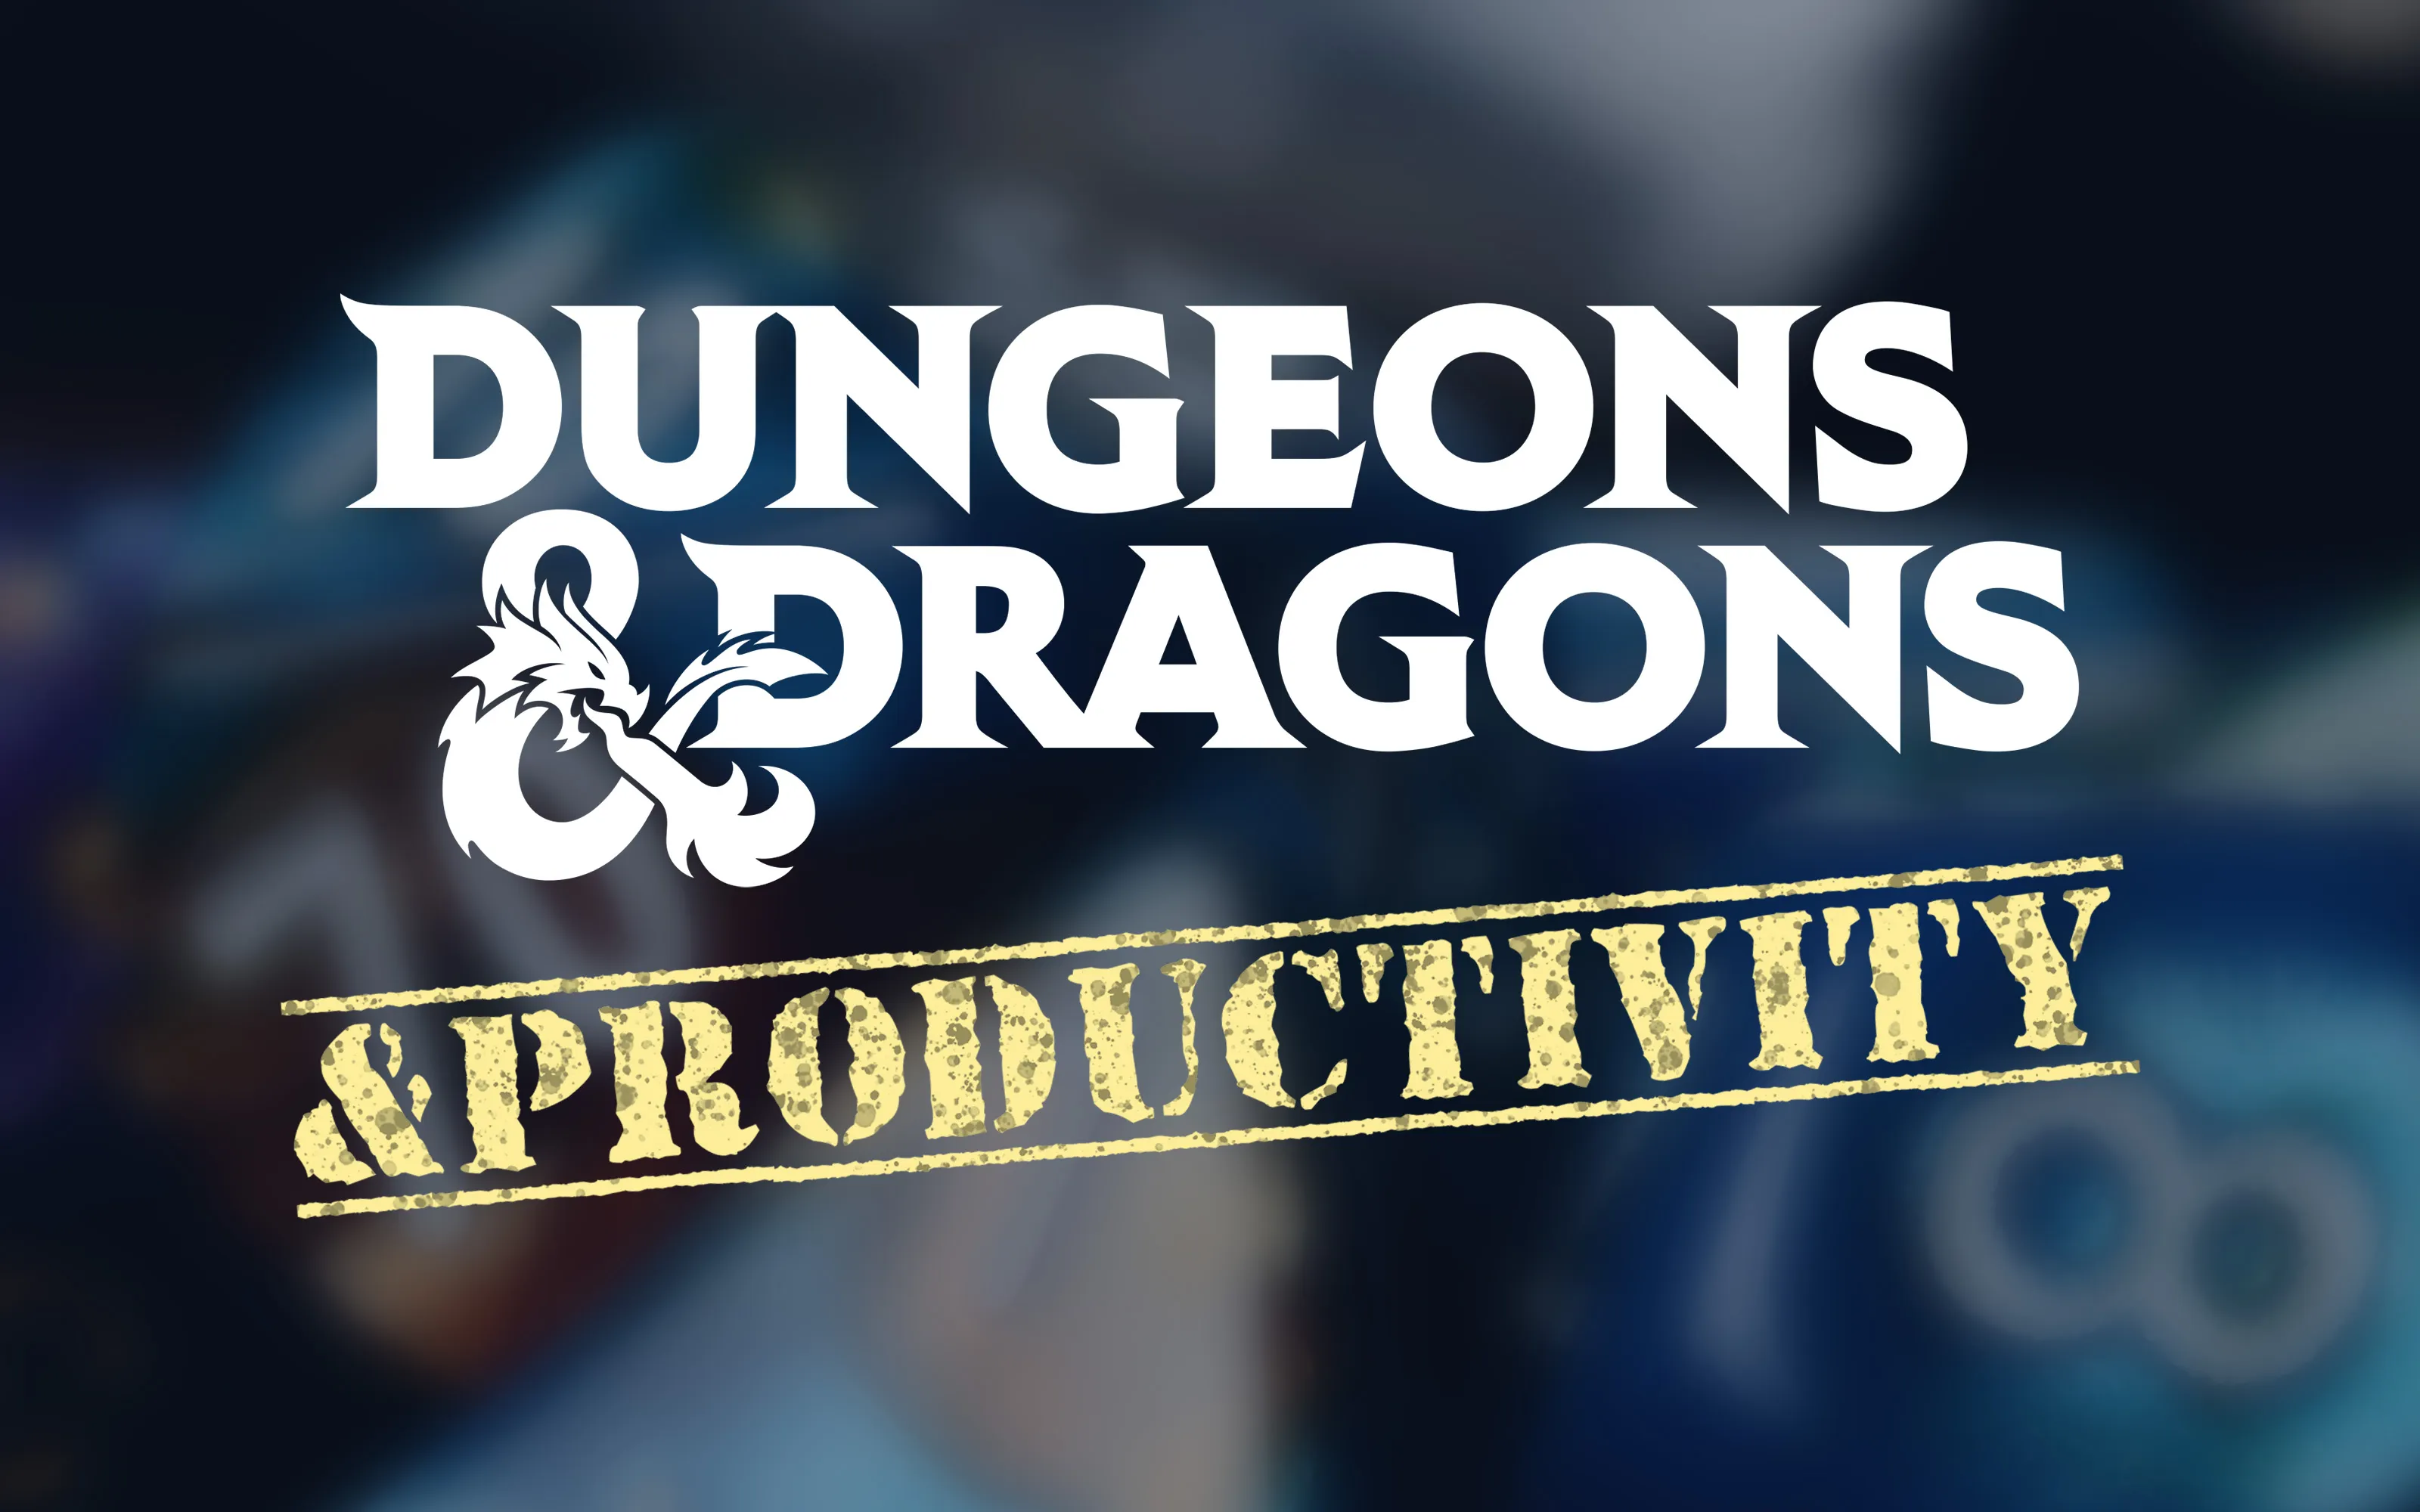 Find More Free Time With This Dungeons & Dragons Mechanic